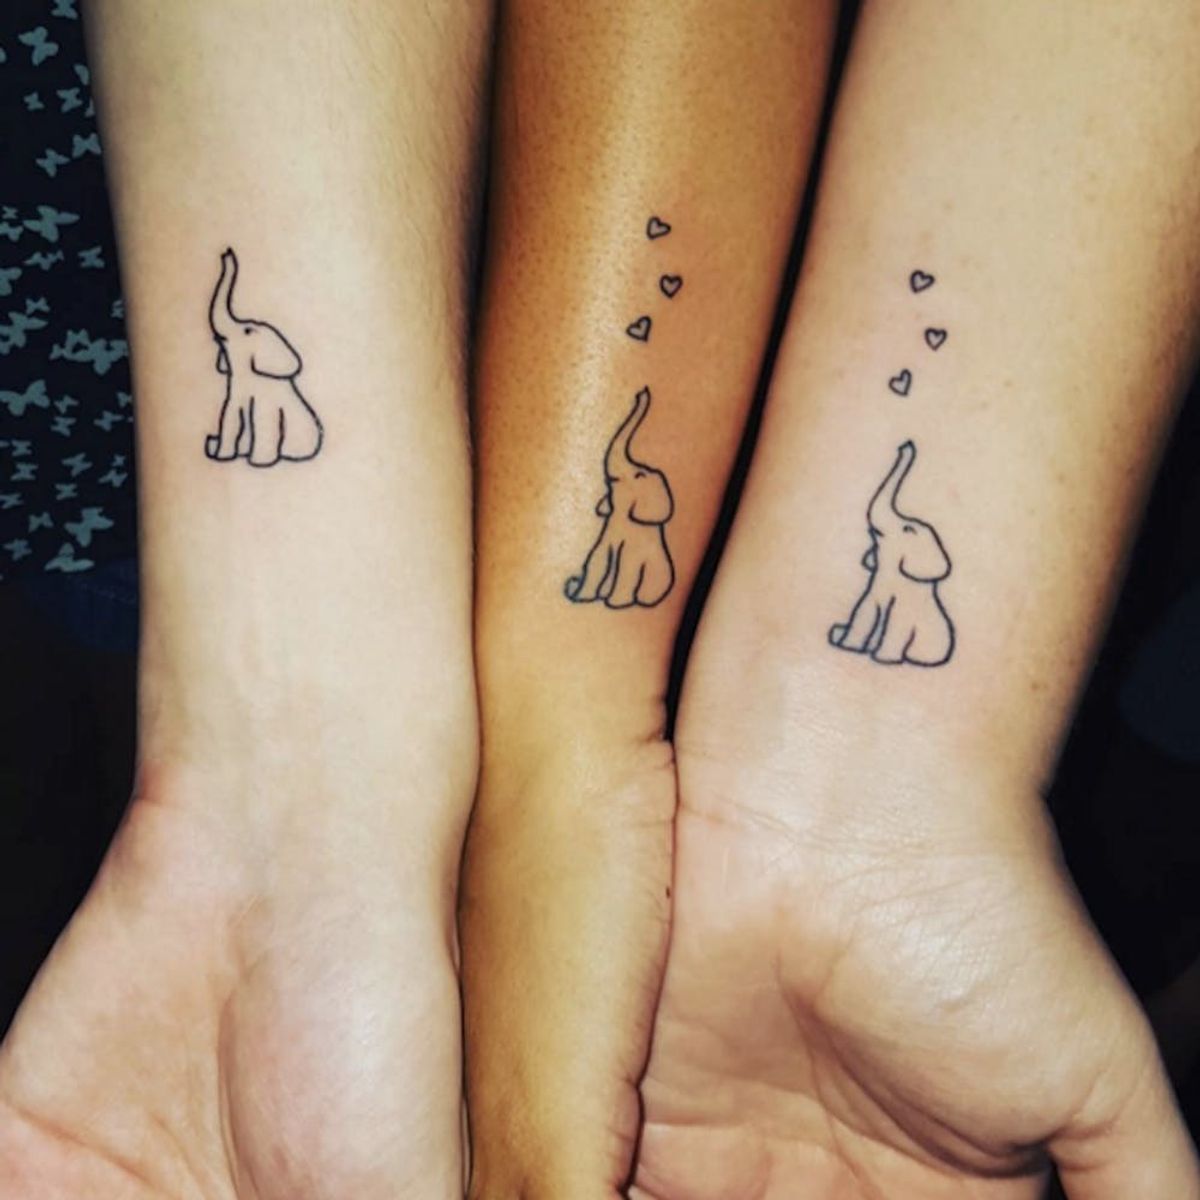 10 #SiblingTattoos That Will Melt Your Heart